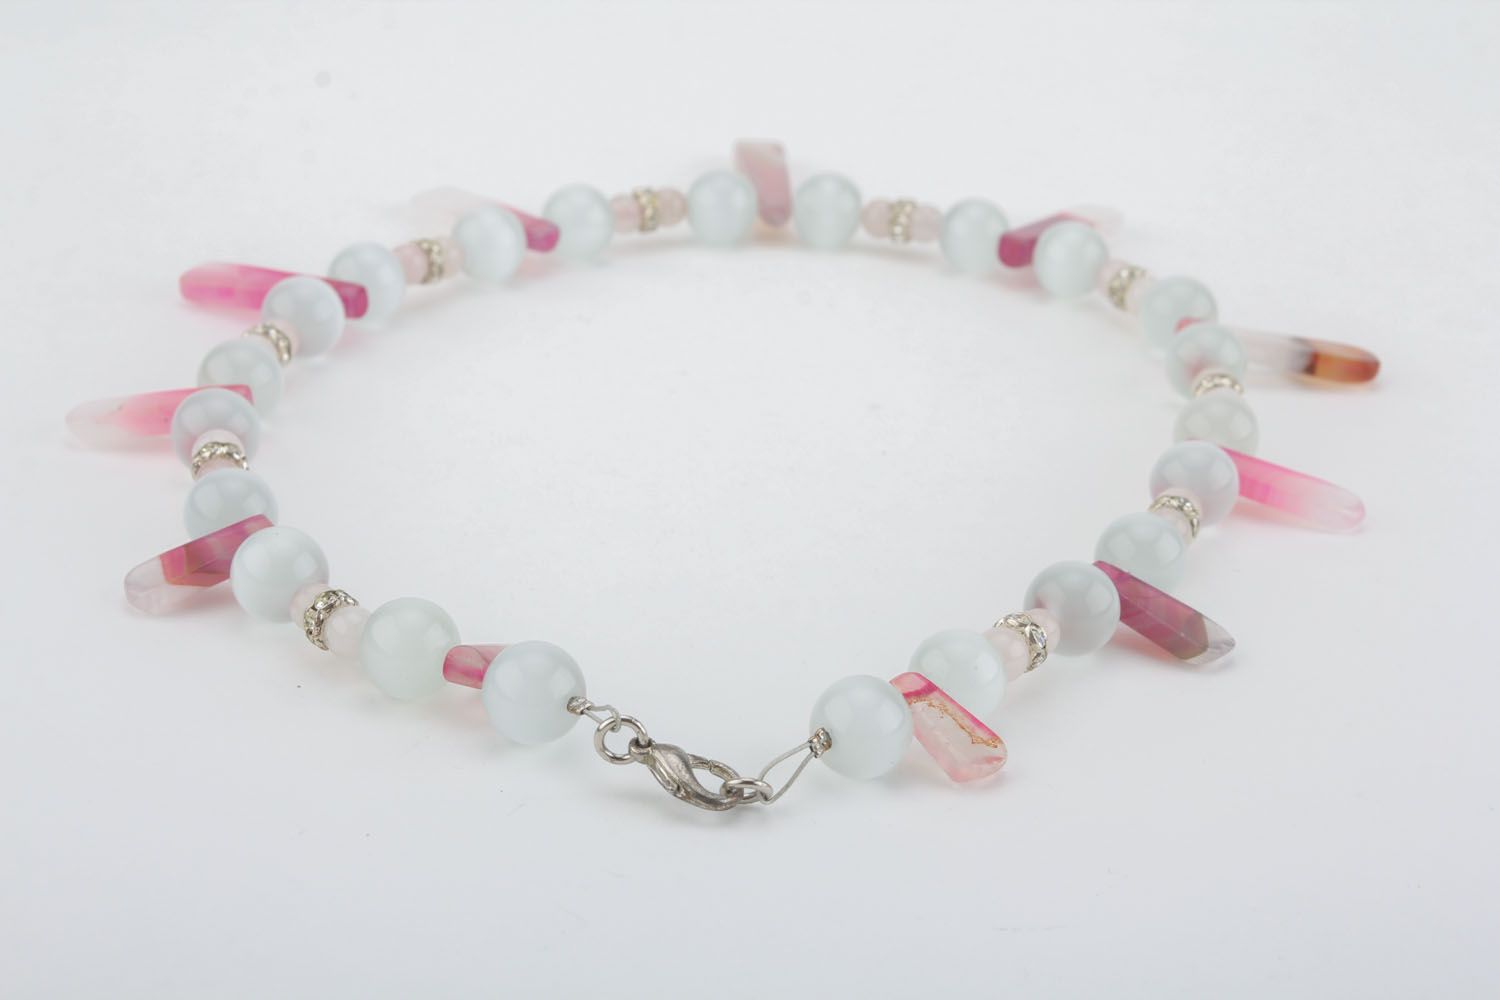 Beautiful necklace made of natural stones photo 3